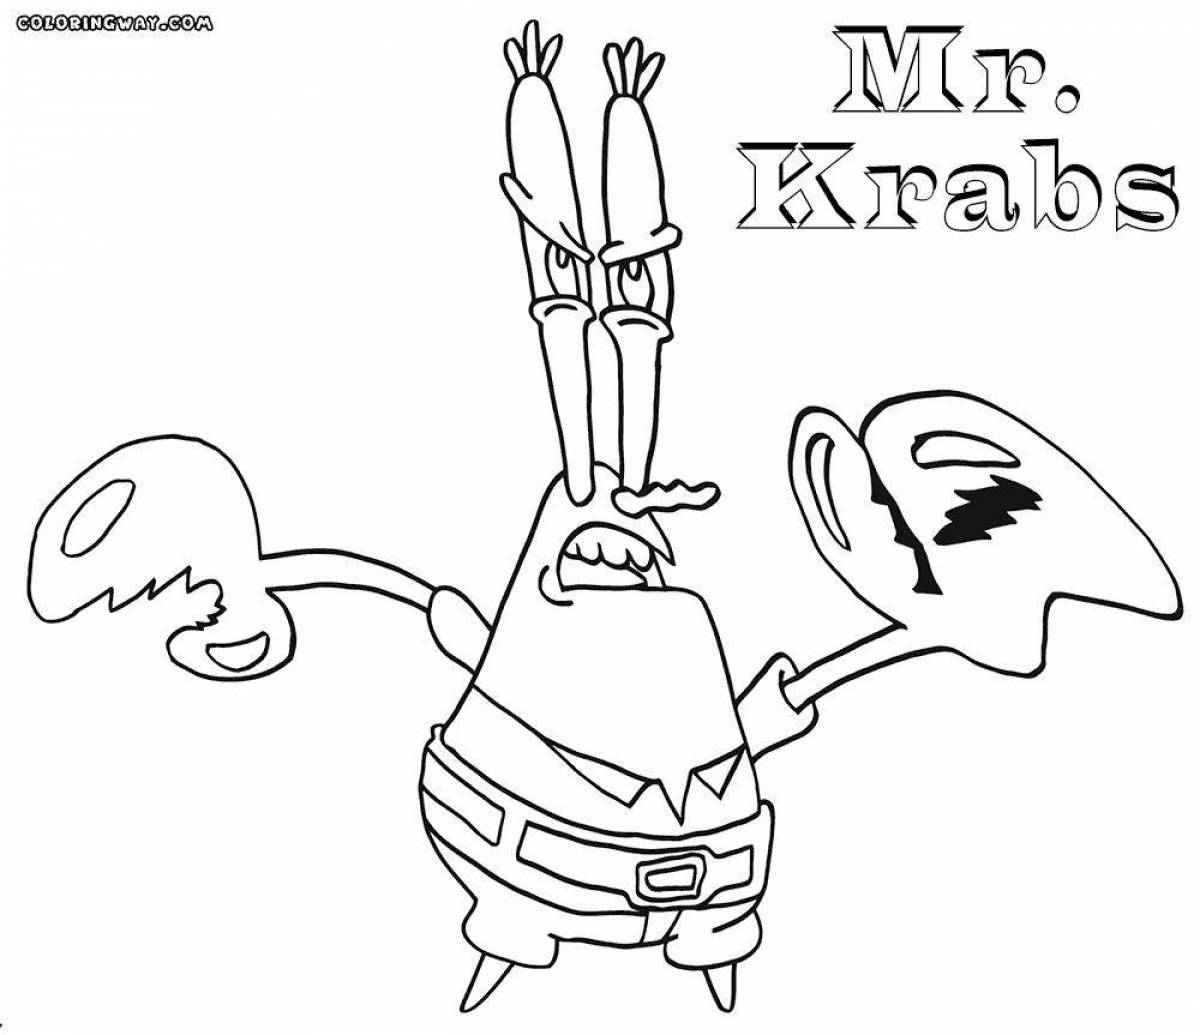 Holiday mr krabs coloring page